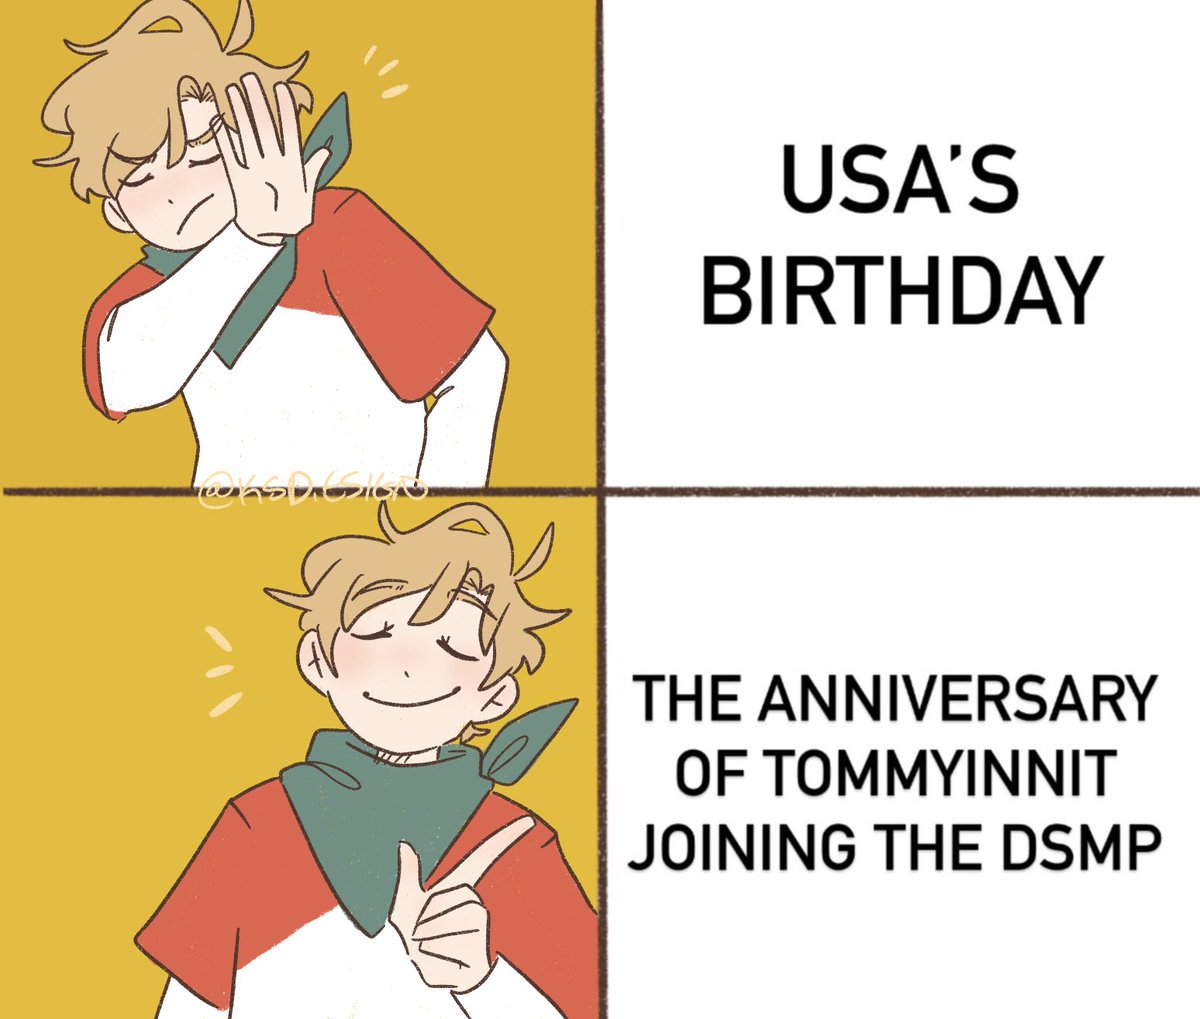 There's only one reason to celebrate July 4th
#tommyinnitfanart 